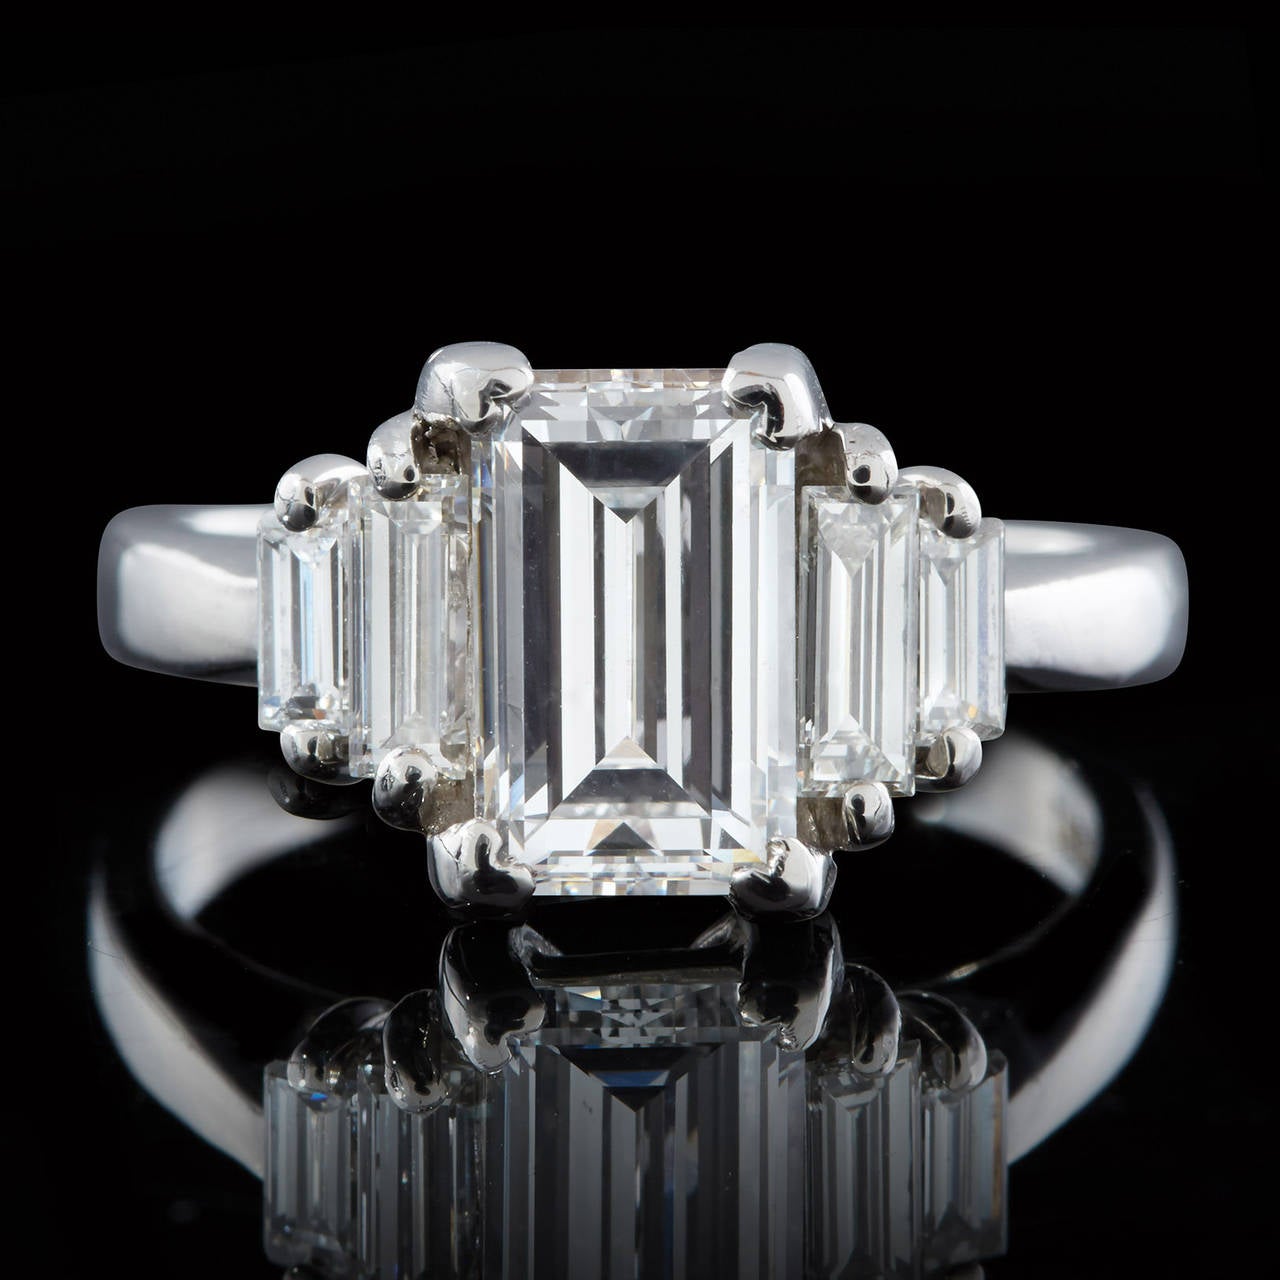 Platinum Emerald Cut Diamond Ring features a center GIA certified 2.02 carat E VS2 Diamond accented with Emerald Cut Side Diamonds totaling 0.54 carats giving a total diamond weight of 2.56 carats. The width of the ring band is 2.7mm and weighs 8.6